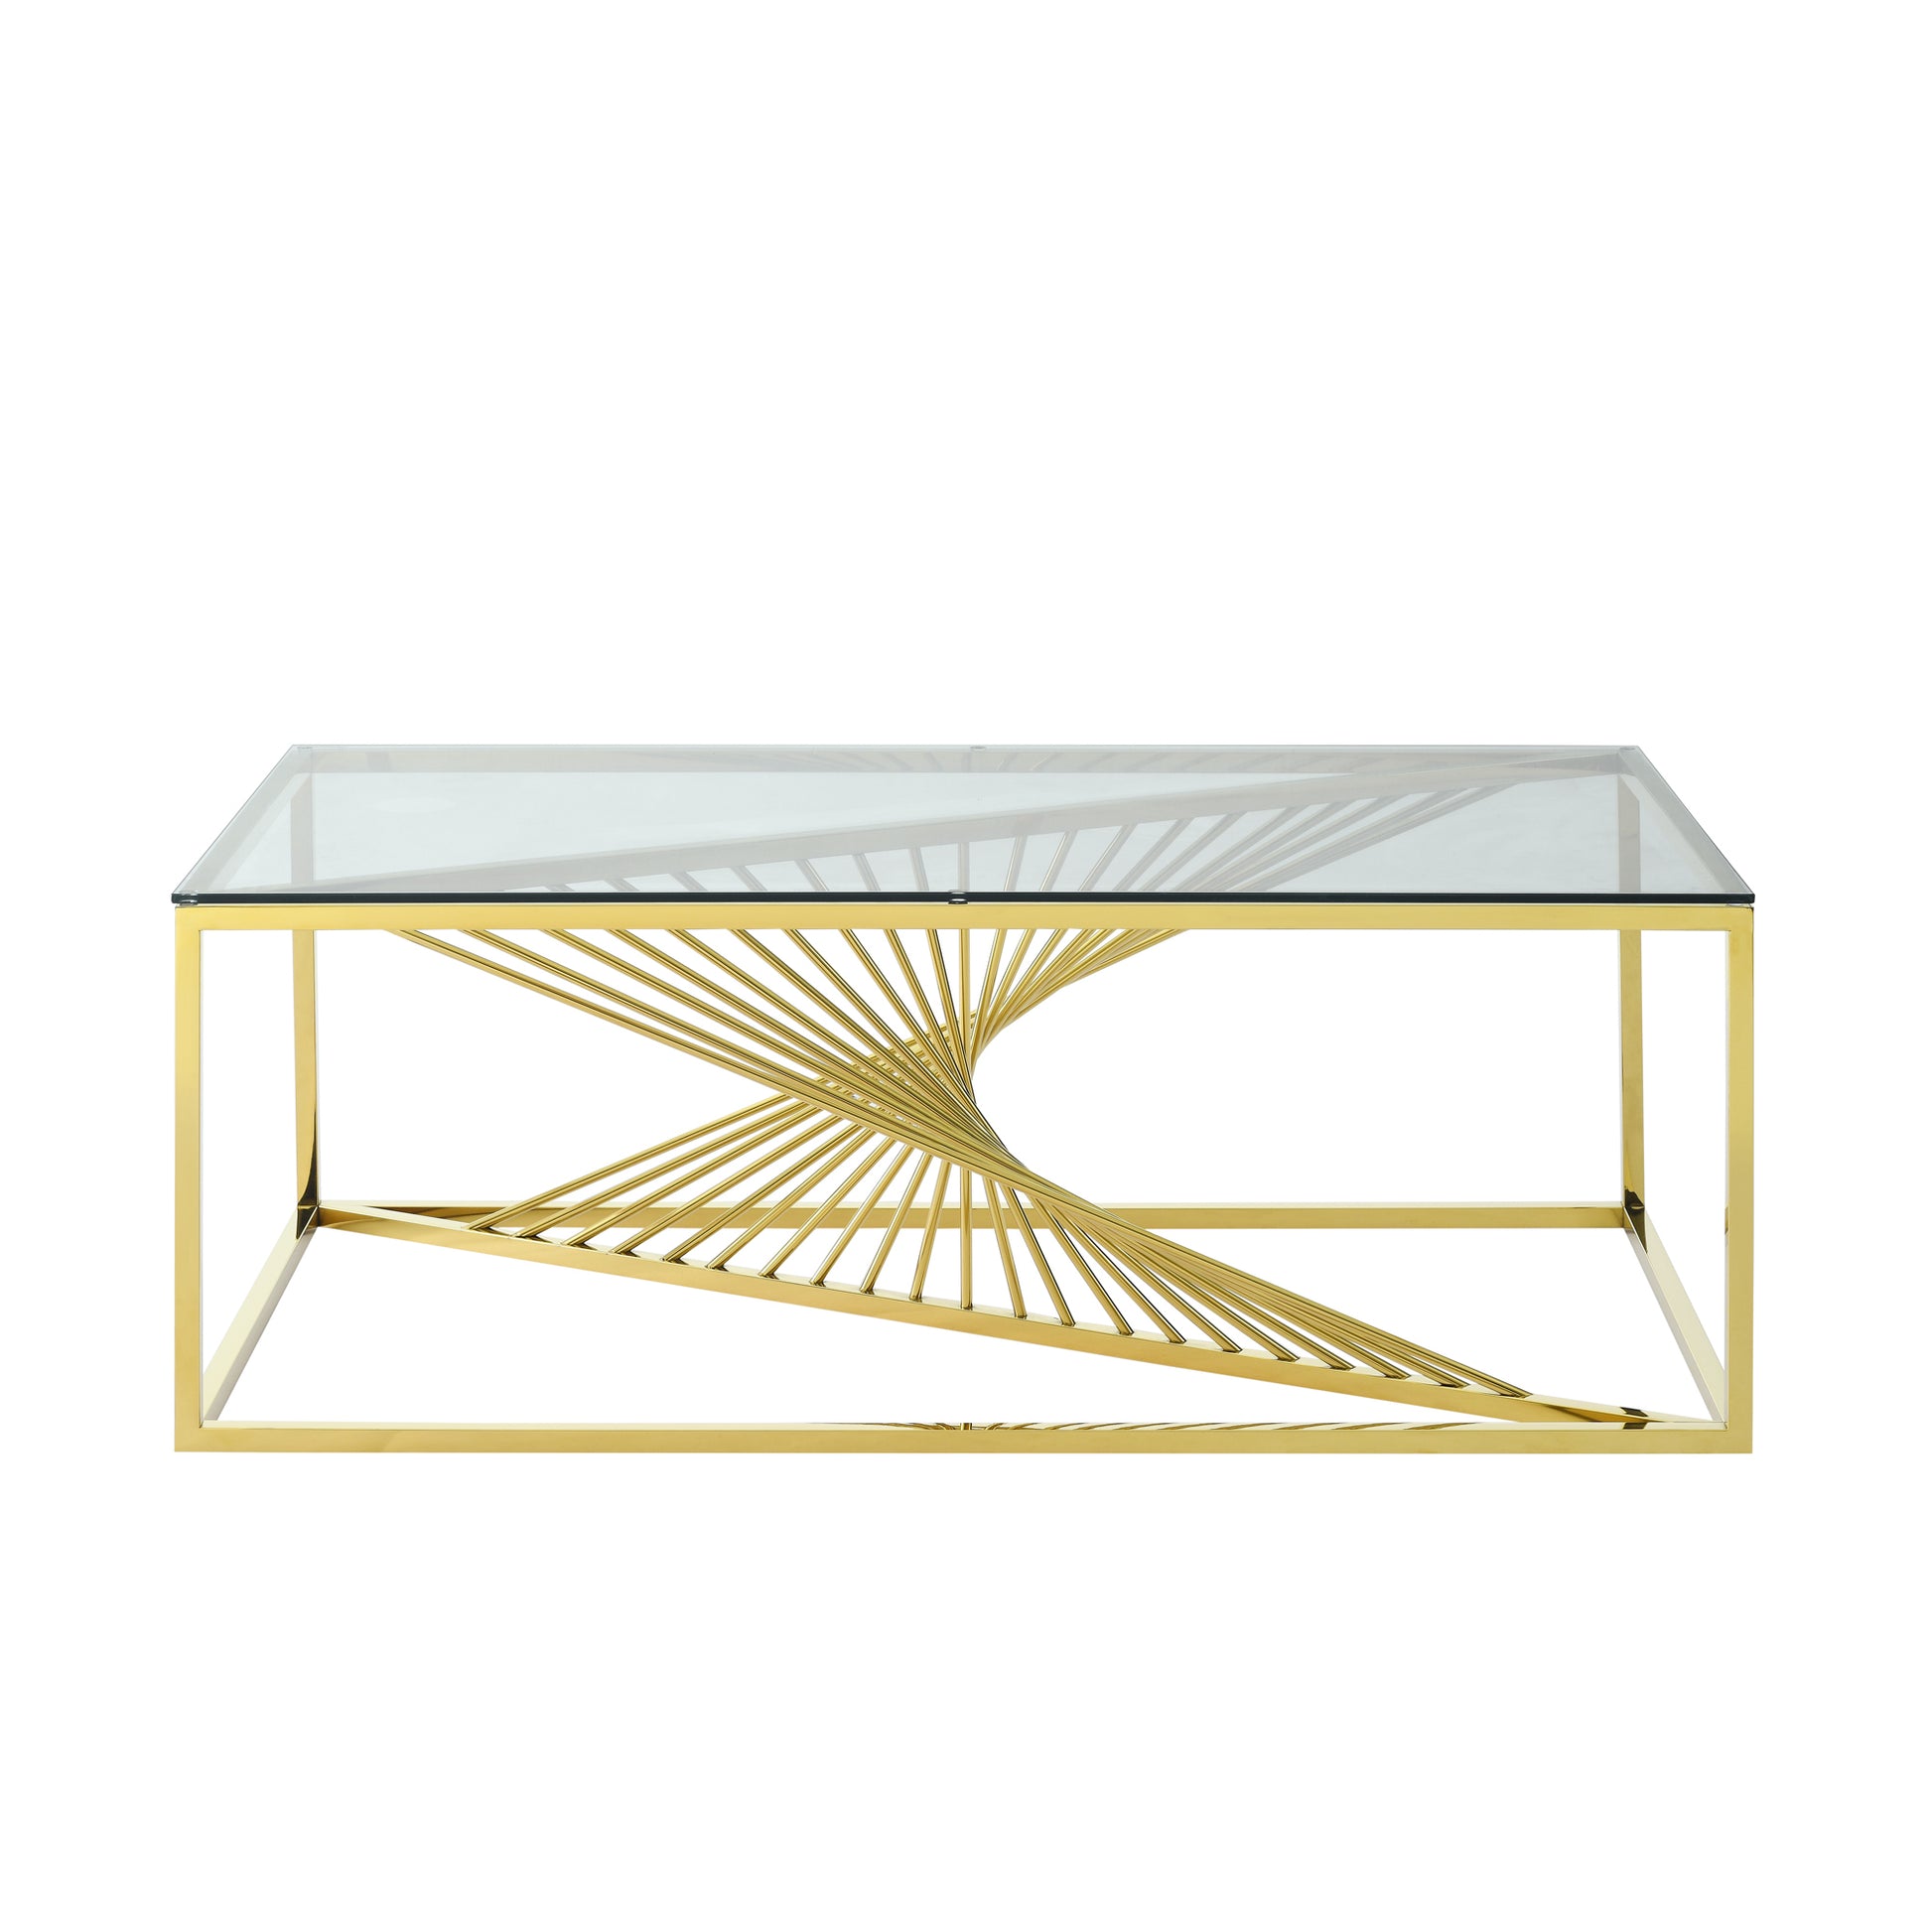 Modern Rectangular Coffee Accent Table with Clear Tempered Glass Top and Stainless Steel Frame for Living Room Bedroom - Gold - Enova Luxe Home Store